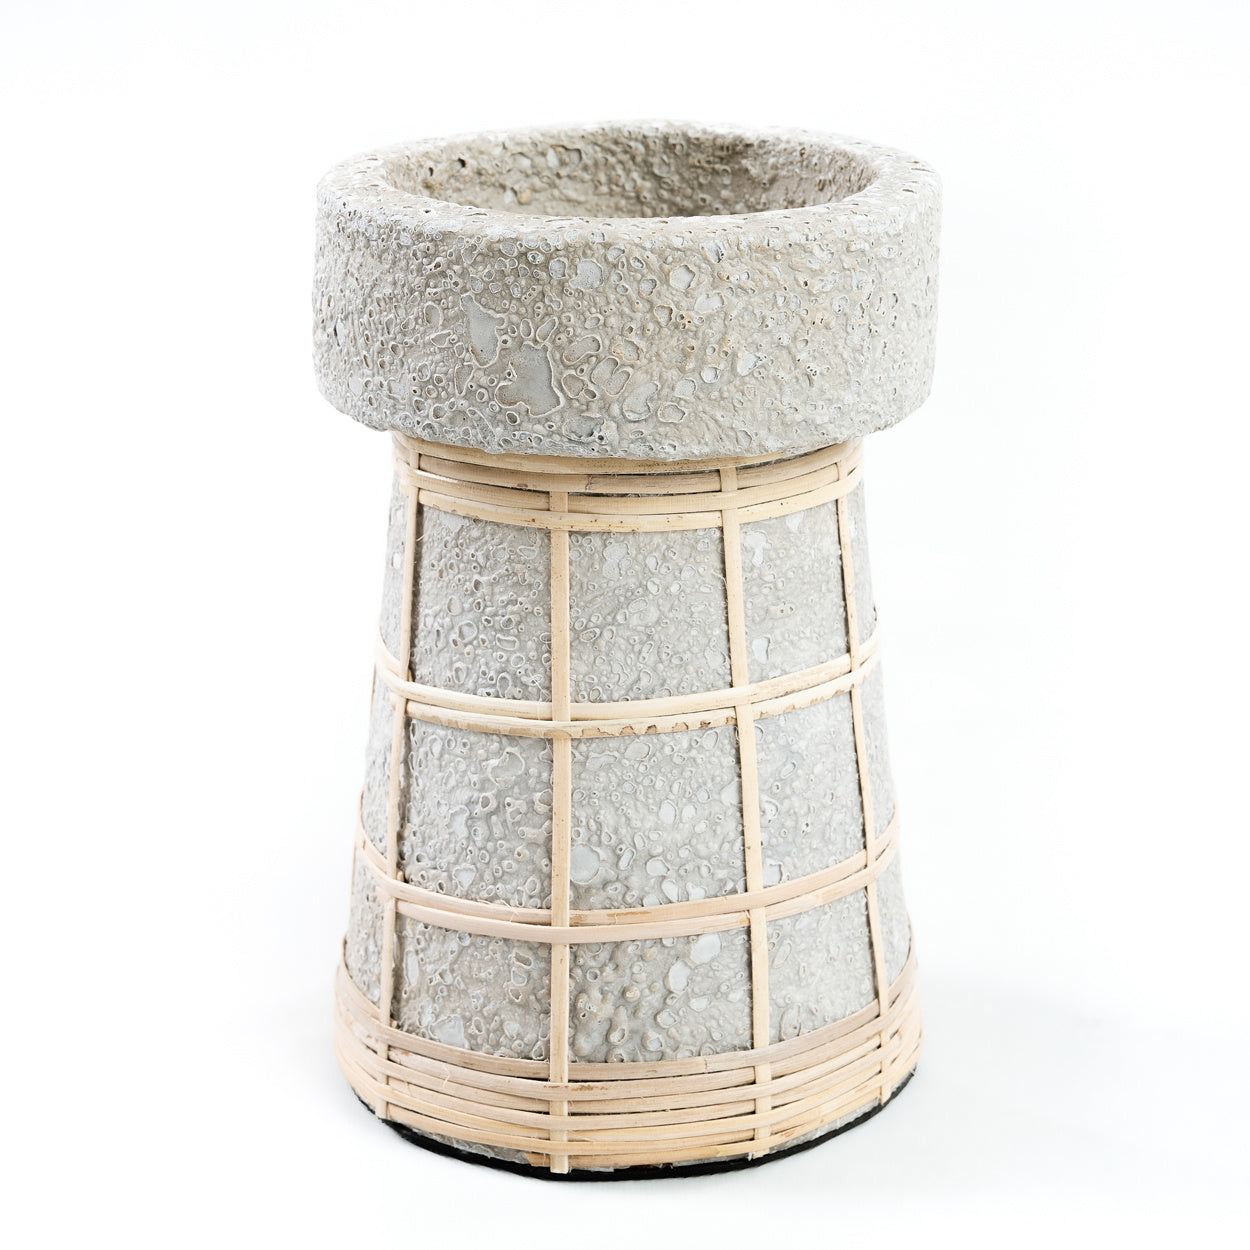 THE SERENE Candle Holder - Concrete Natural Large Size